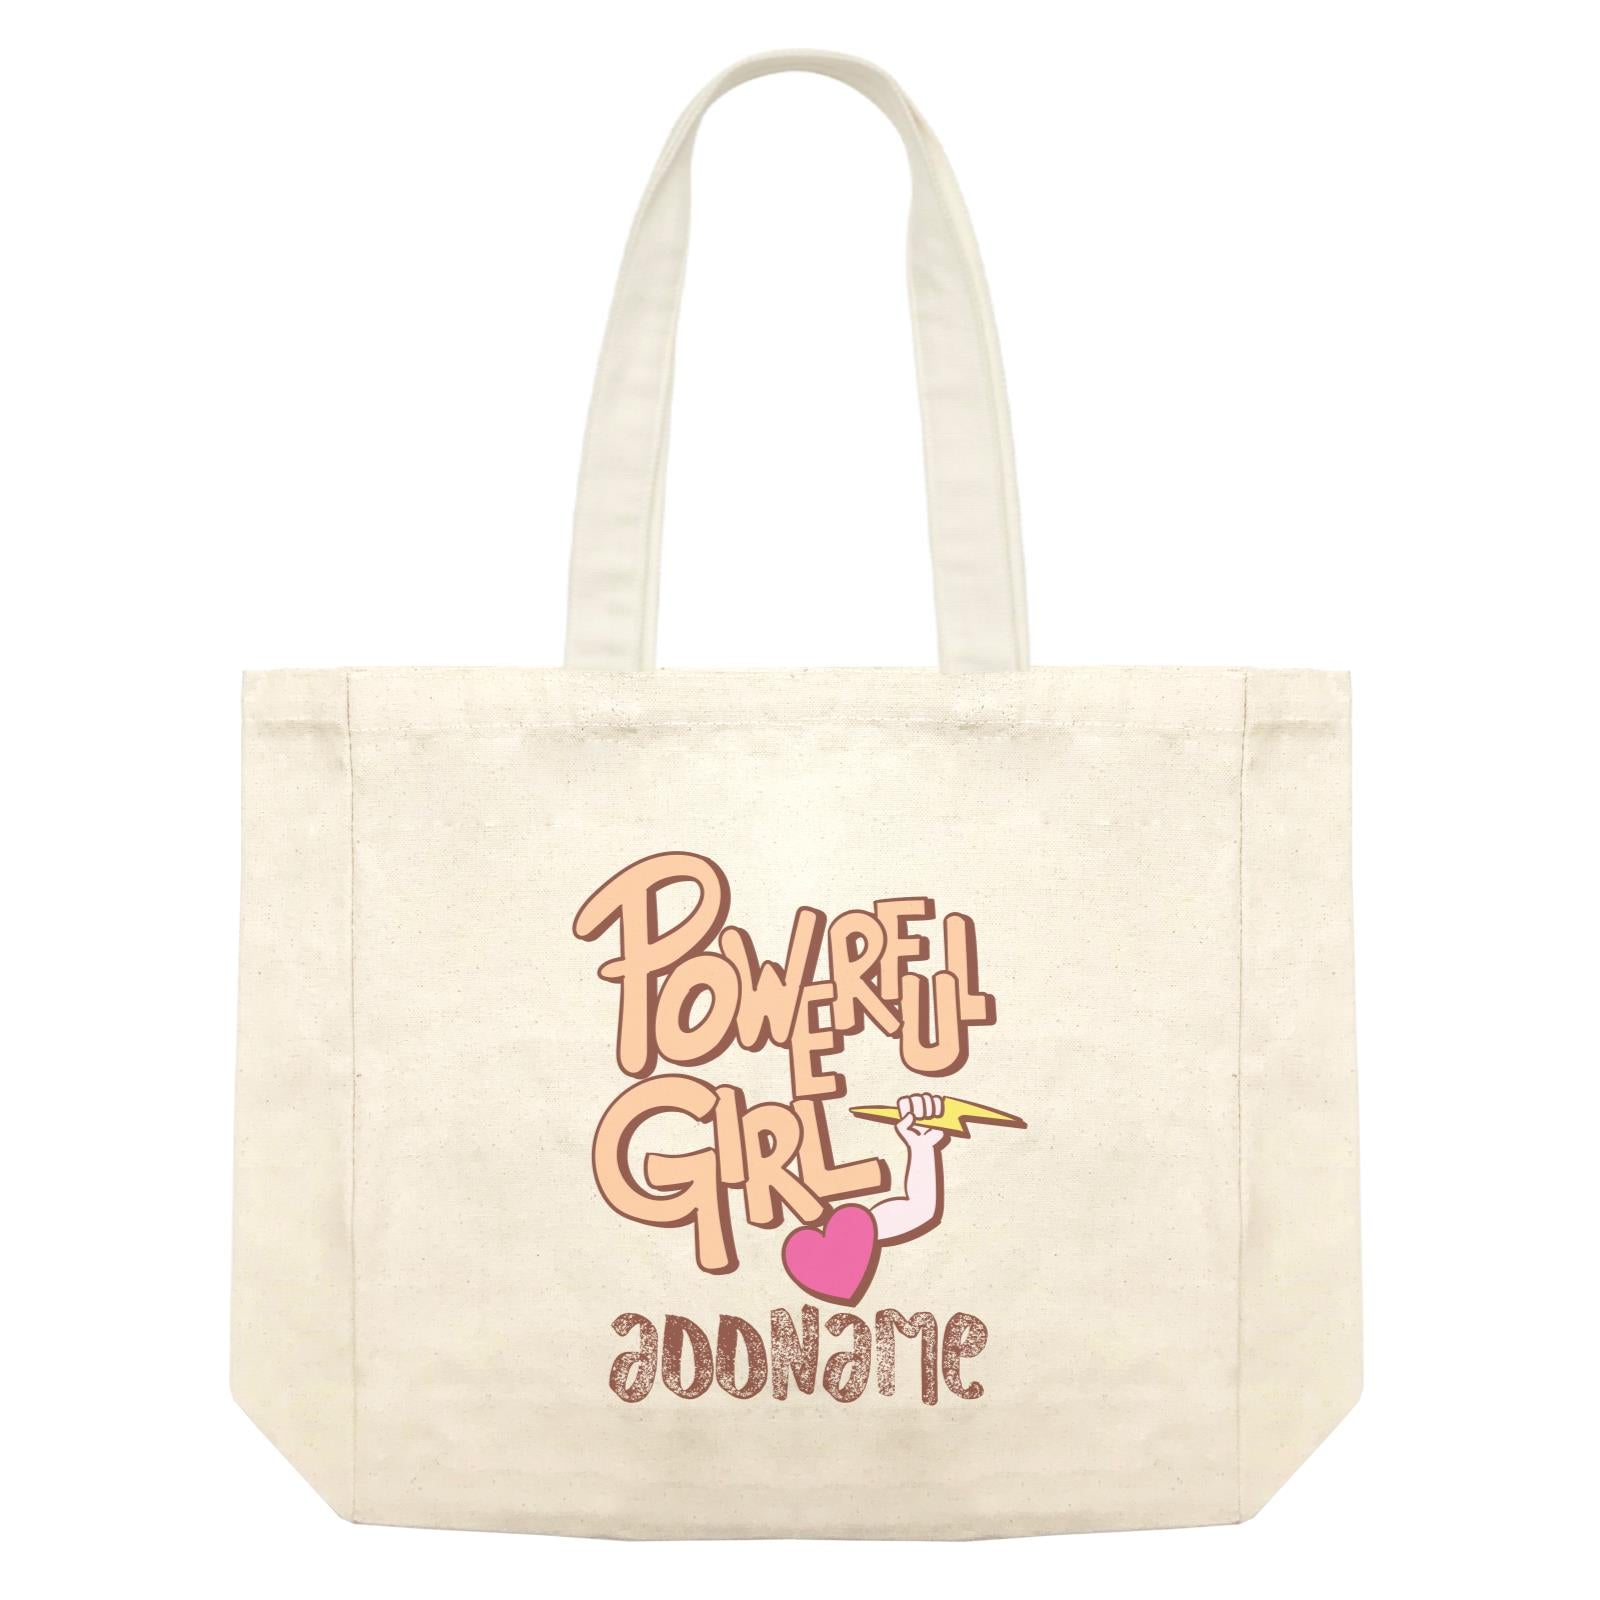 Cool Cute Words Powerful Girl Heart Hold Lightning Addname Shopping Bag